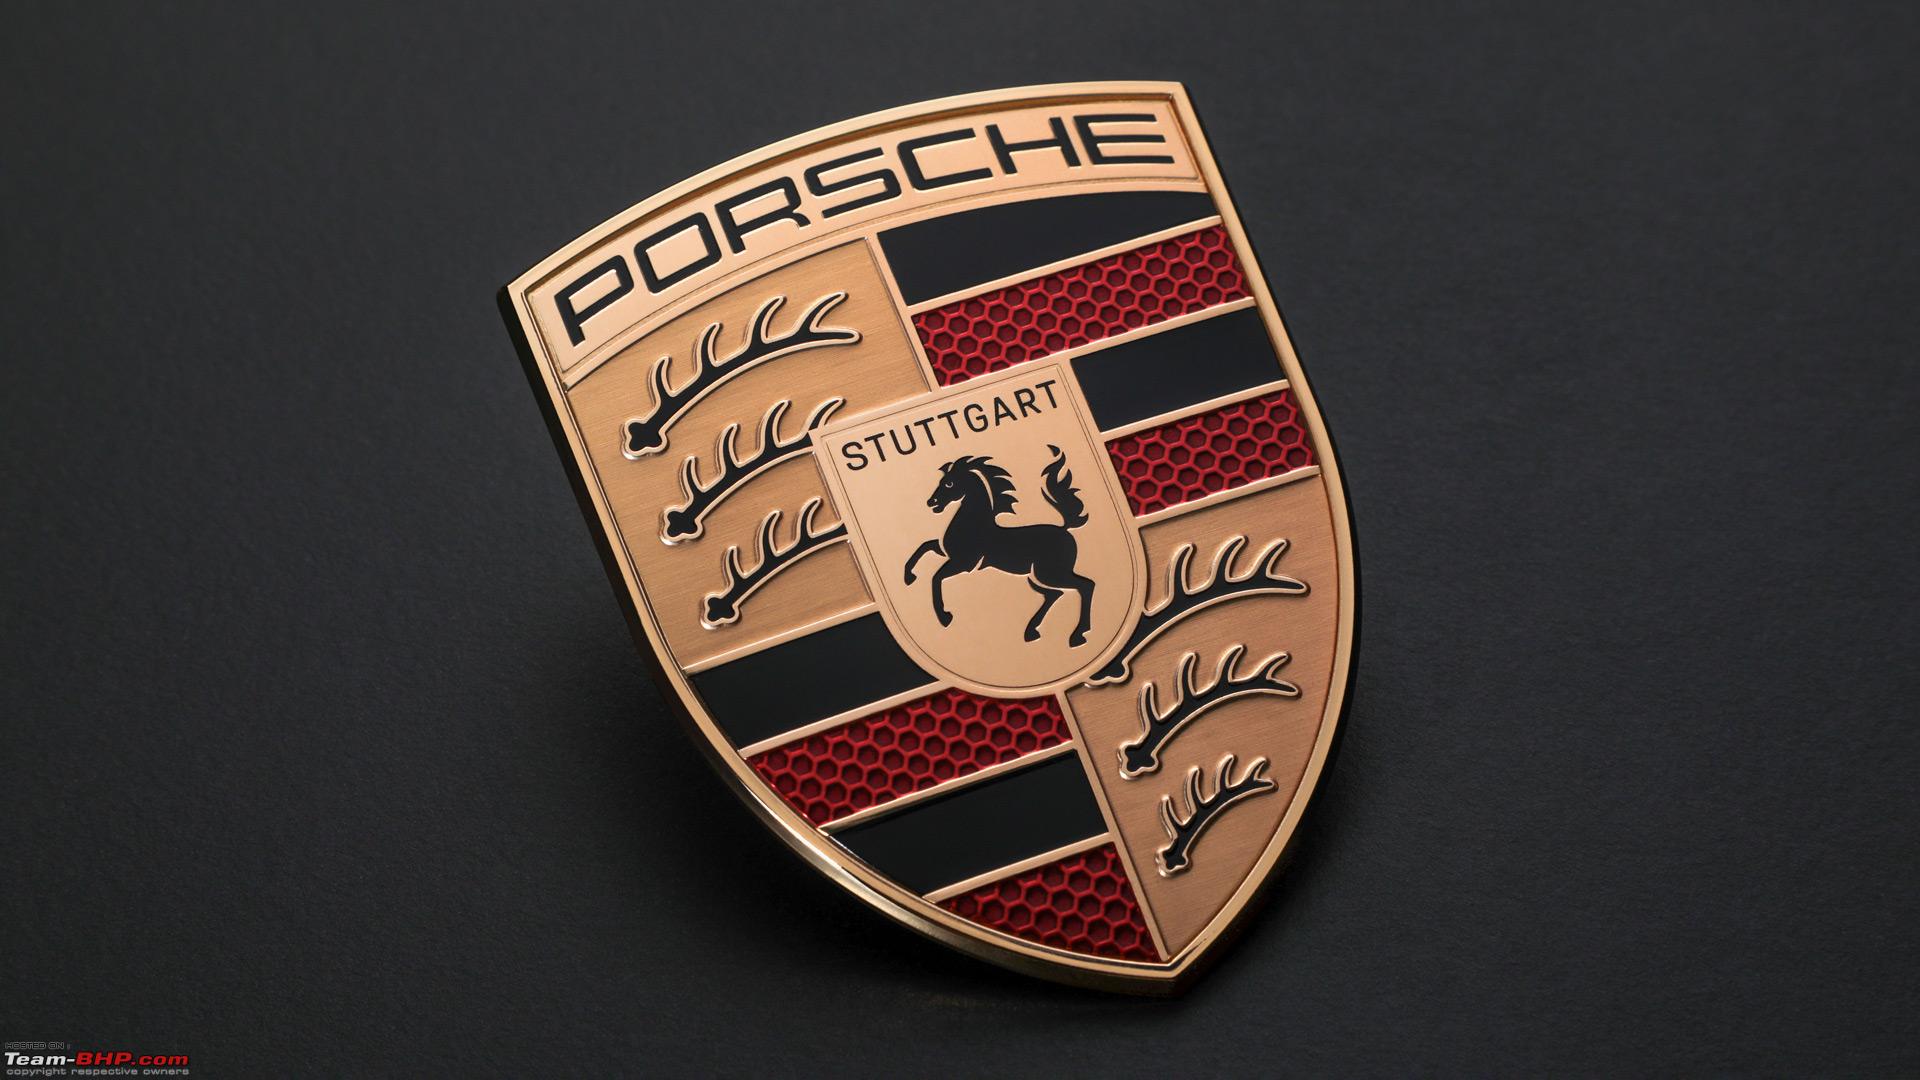 Porsche reveals its revised crest logo ahead of brand's 75th ...